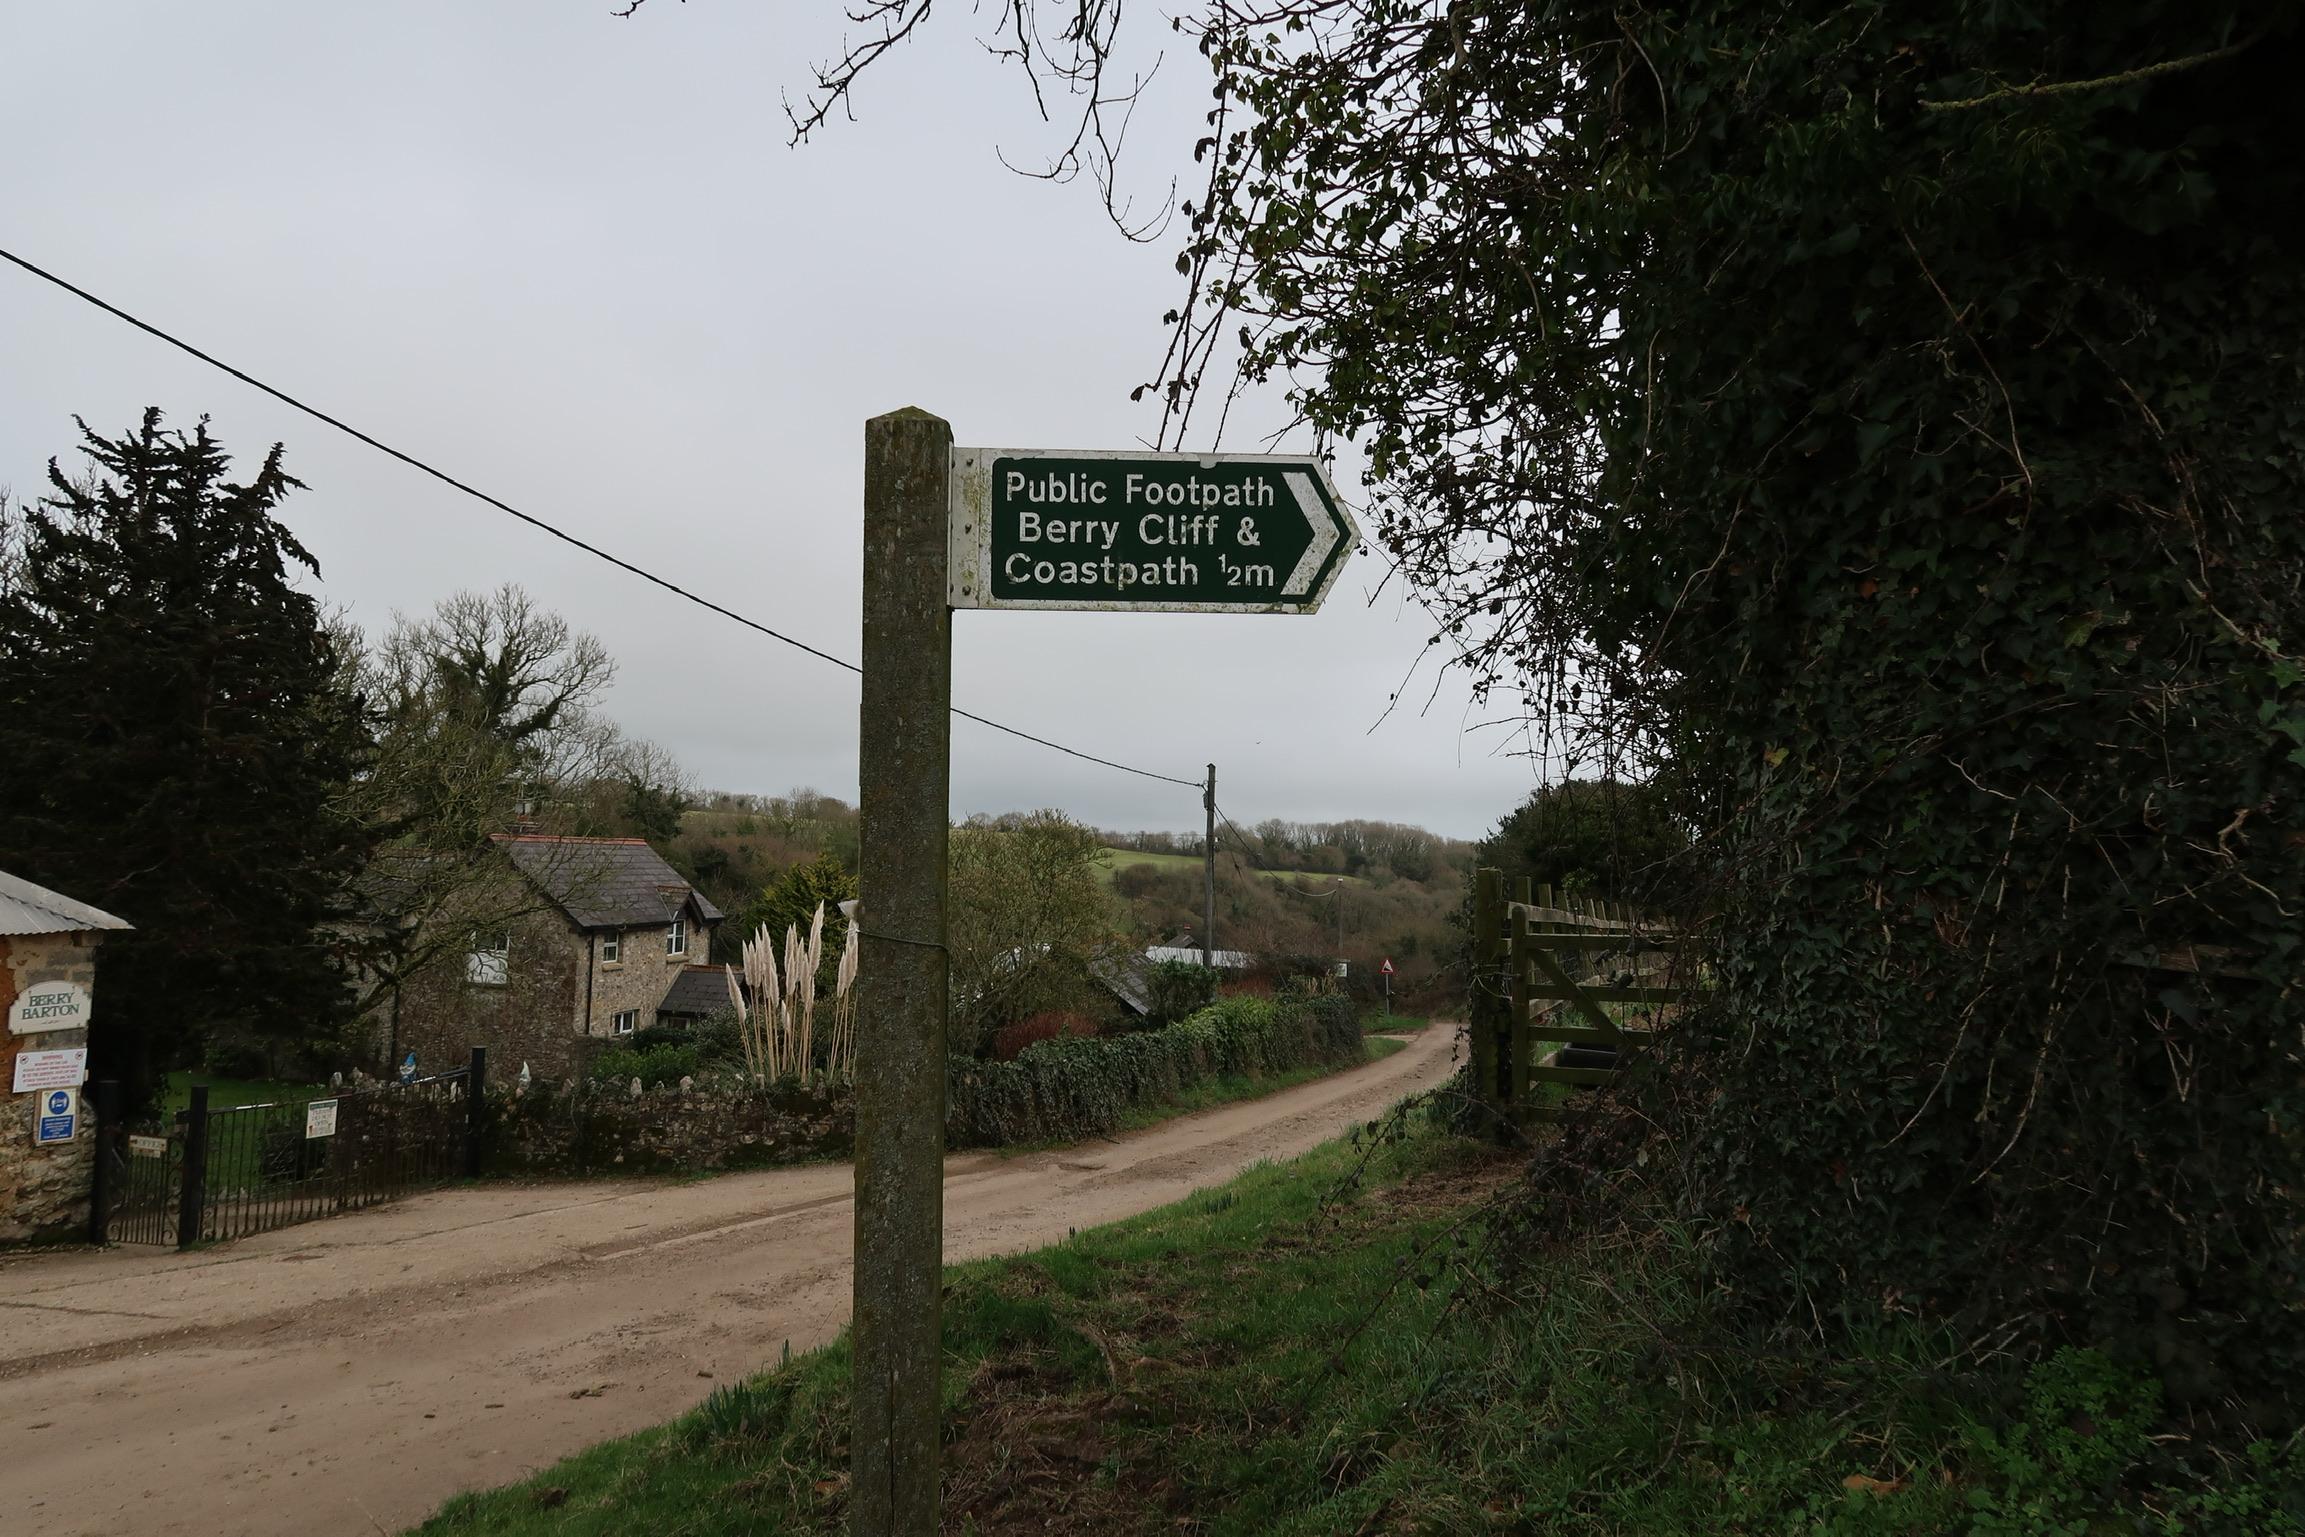 Public footpath pointing towards Berry Cliff & Coastpath